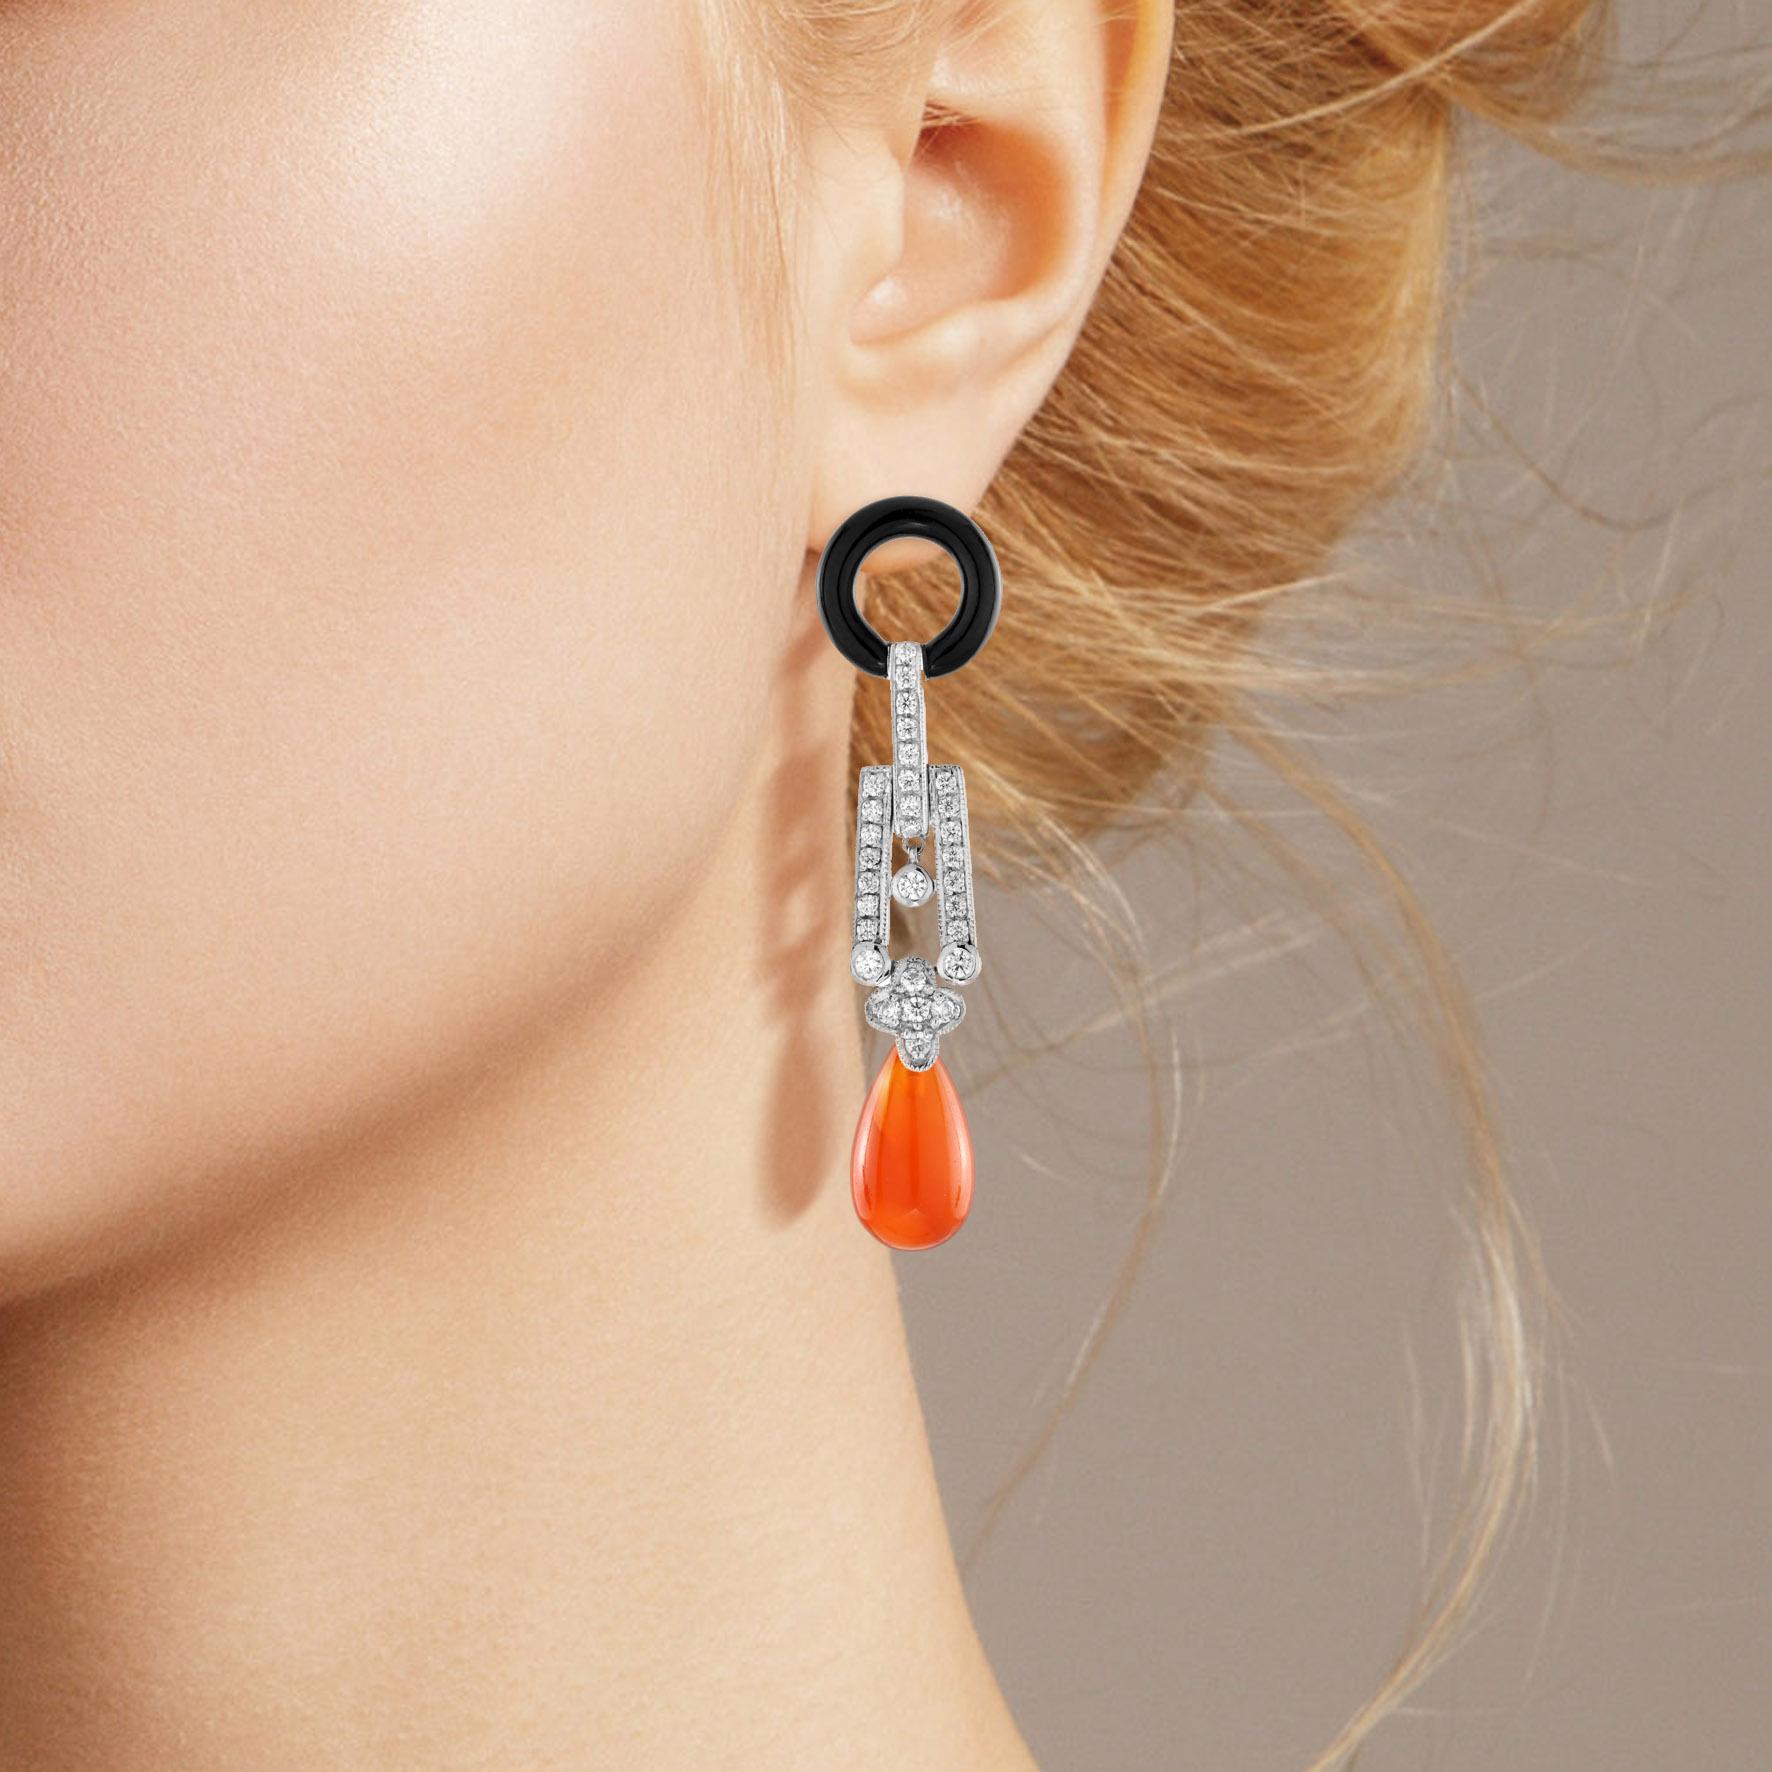 These statement earrings are Art Deco inspired handcrafted using approximately 8.00 carat teardrop shape carnelian. The upper part is decorated with shimmering diamonds, and donut shaped black onyx. Create your signature look with these lovely